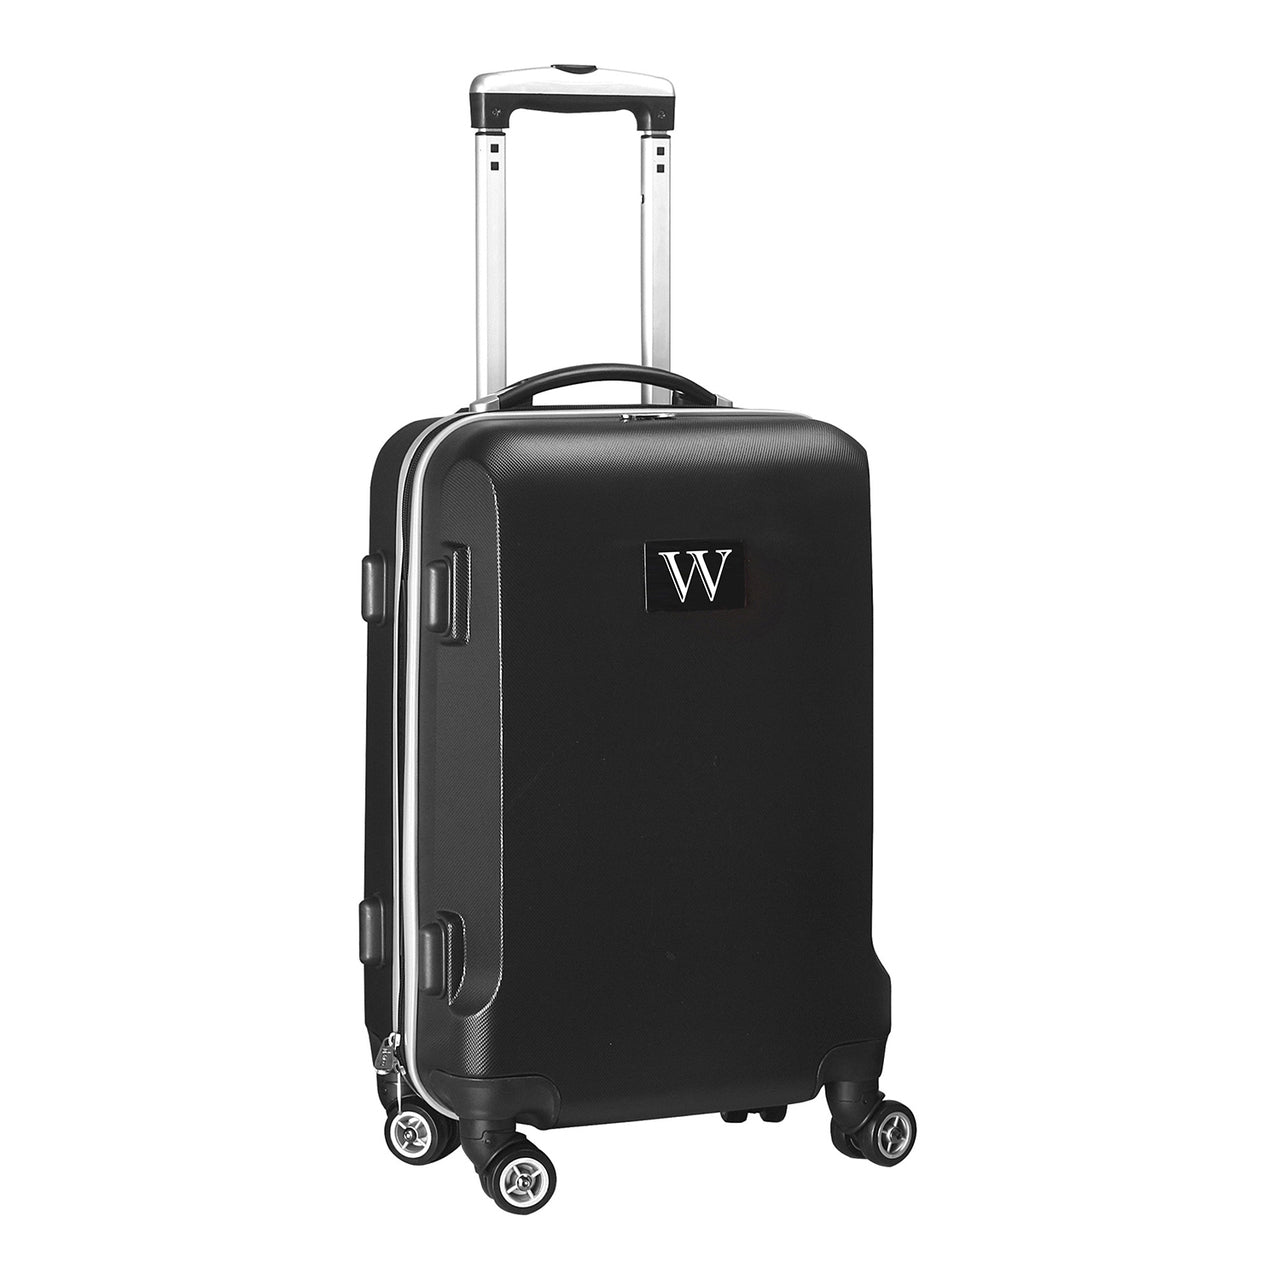 Personalized Initial Name letter "W" 20 inches Carry on Hardcase Spinner Luggage by Mojo in BLACK